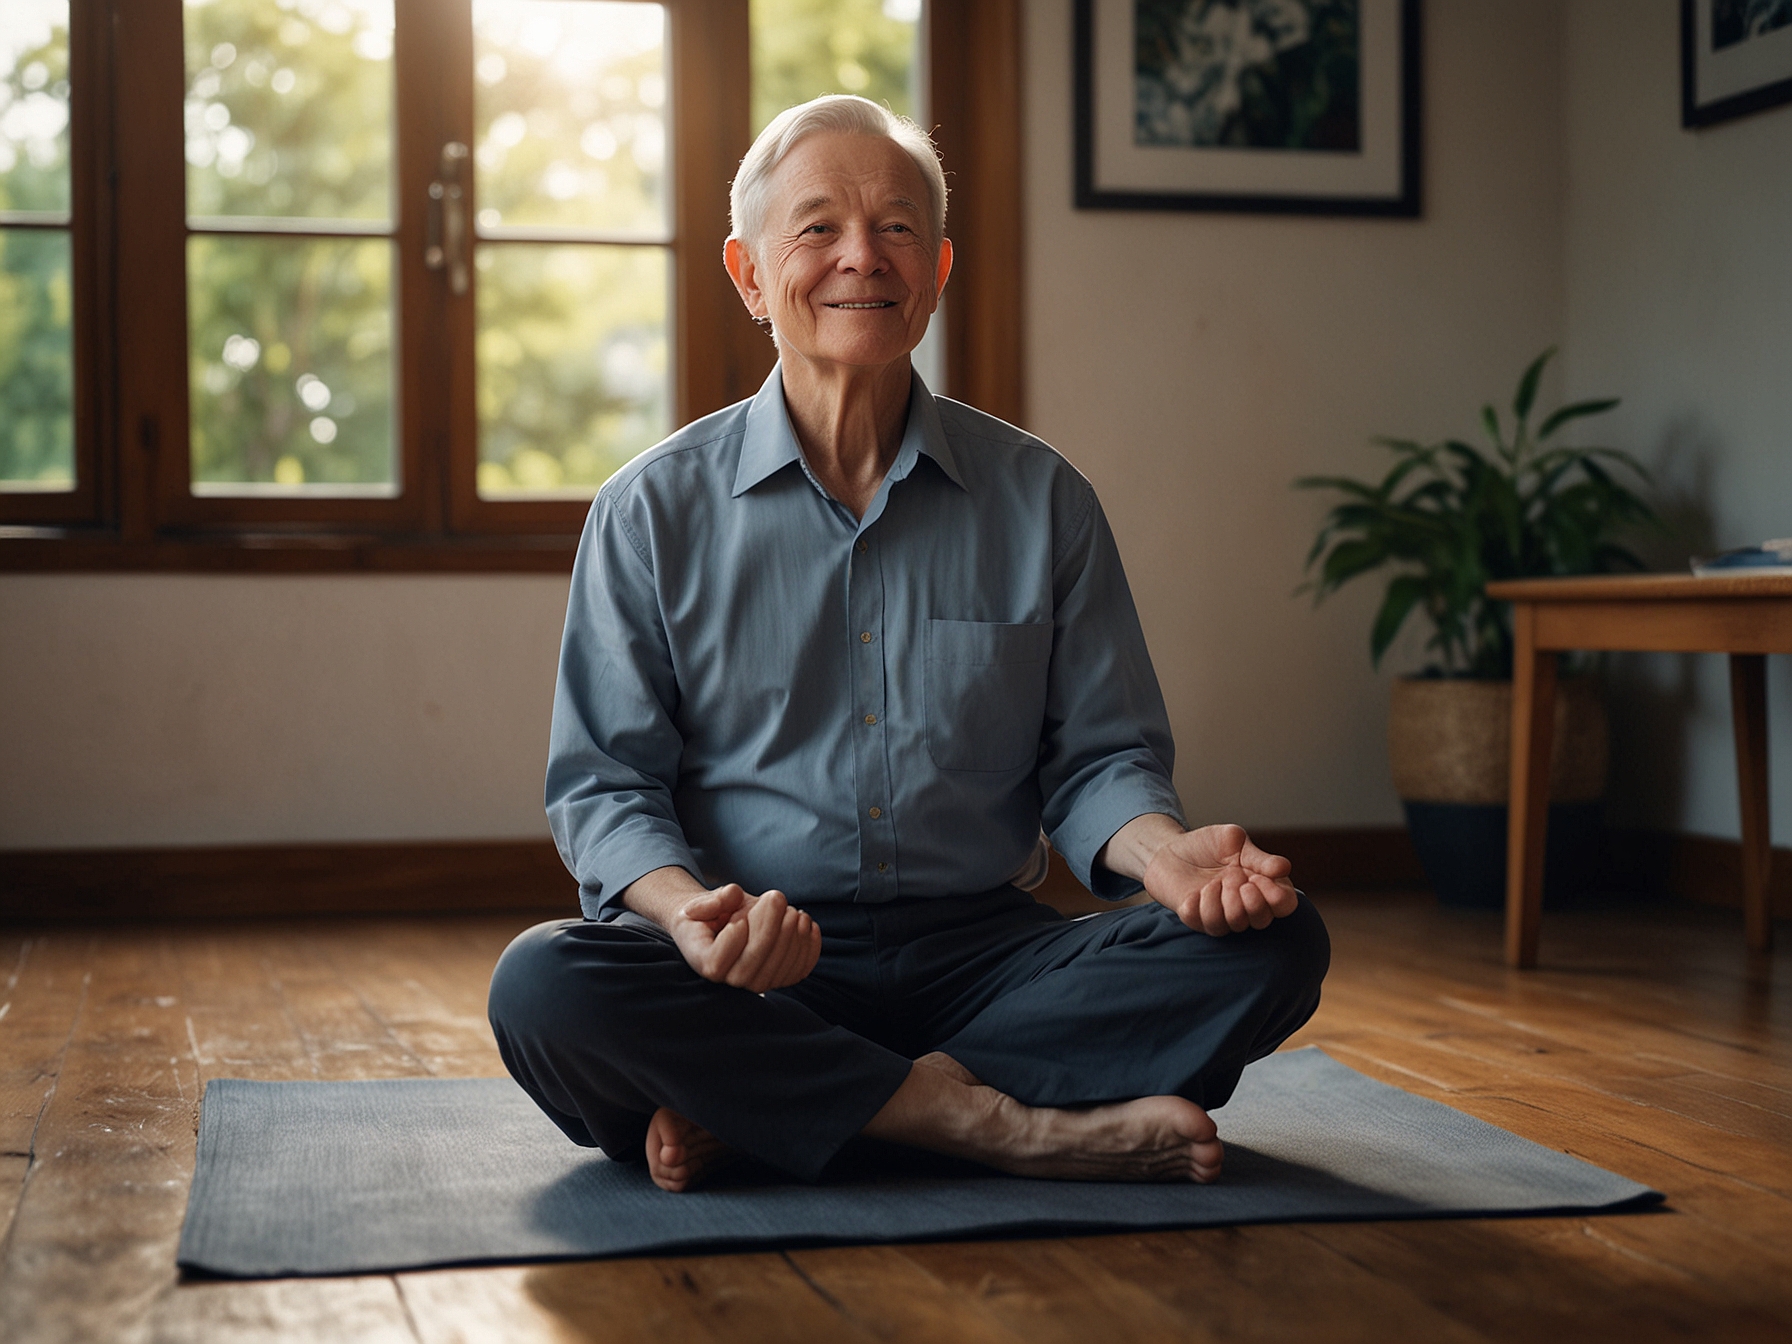 A senior comfortably seated in Sukhasana (Easy Pose) on a yoga mat, emphasizing relaxation and meditation, showcasing how yoga can help alleviate stress and improve mental clarity.